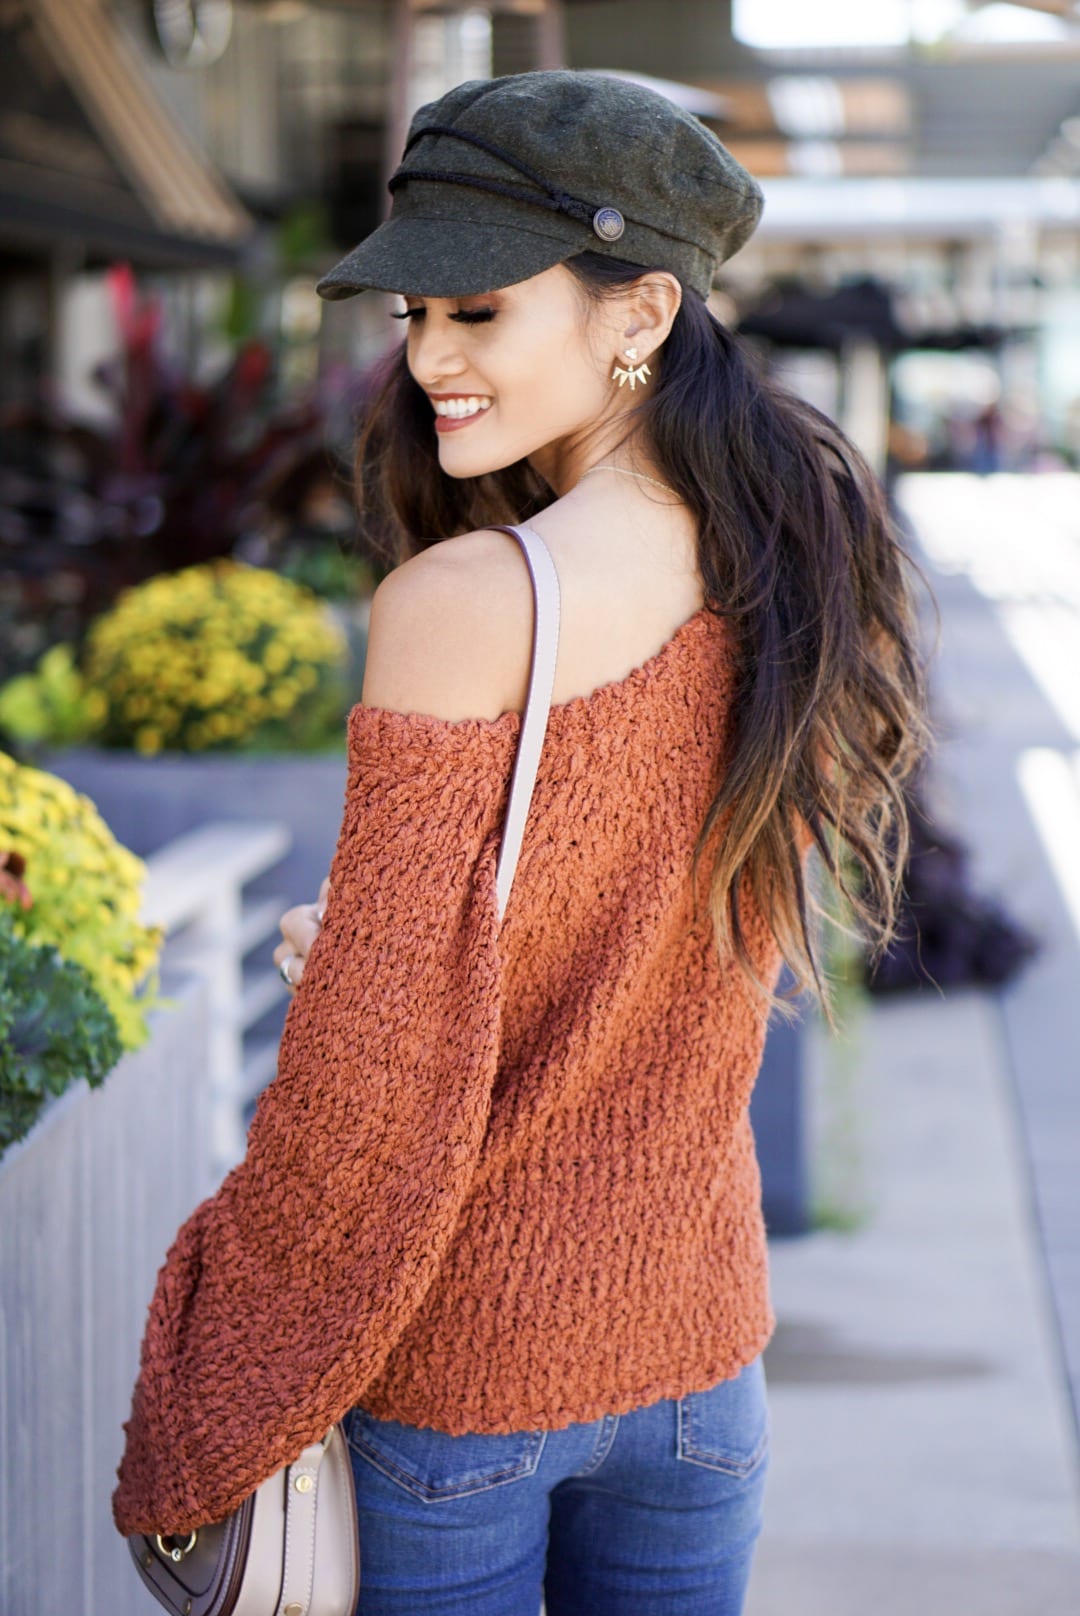 bell sleeve sweaters, bell sleeve tops, sweaters under $100, Thanksgiving outfit, suede cap, news boy cap, Chloe dupe, sugar fix, evereve, orange sweater, rust sweater, thanksgiving sweater, fall sweater, tall suede boots 